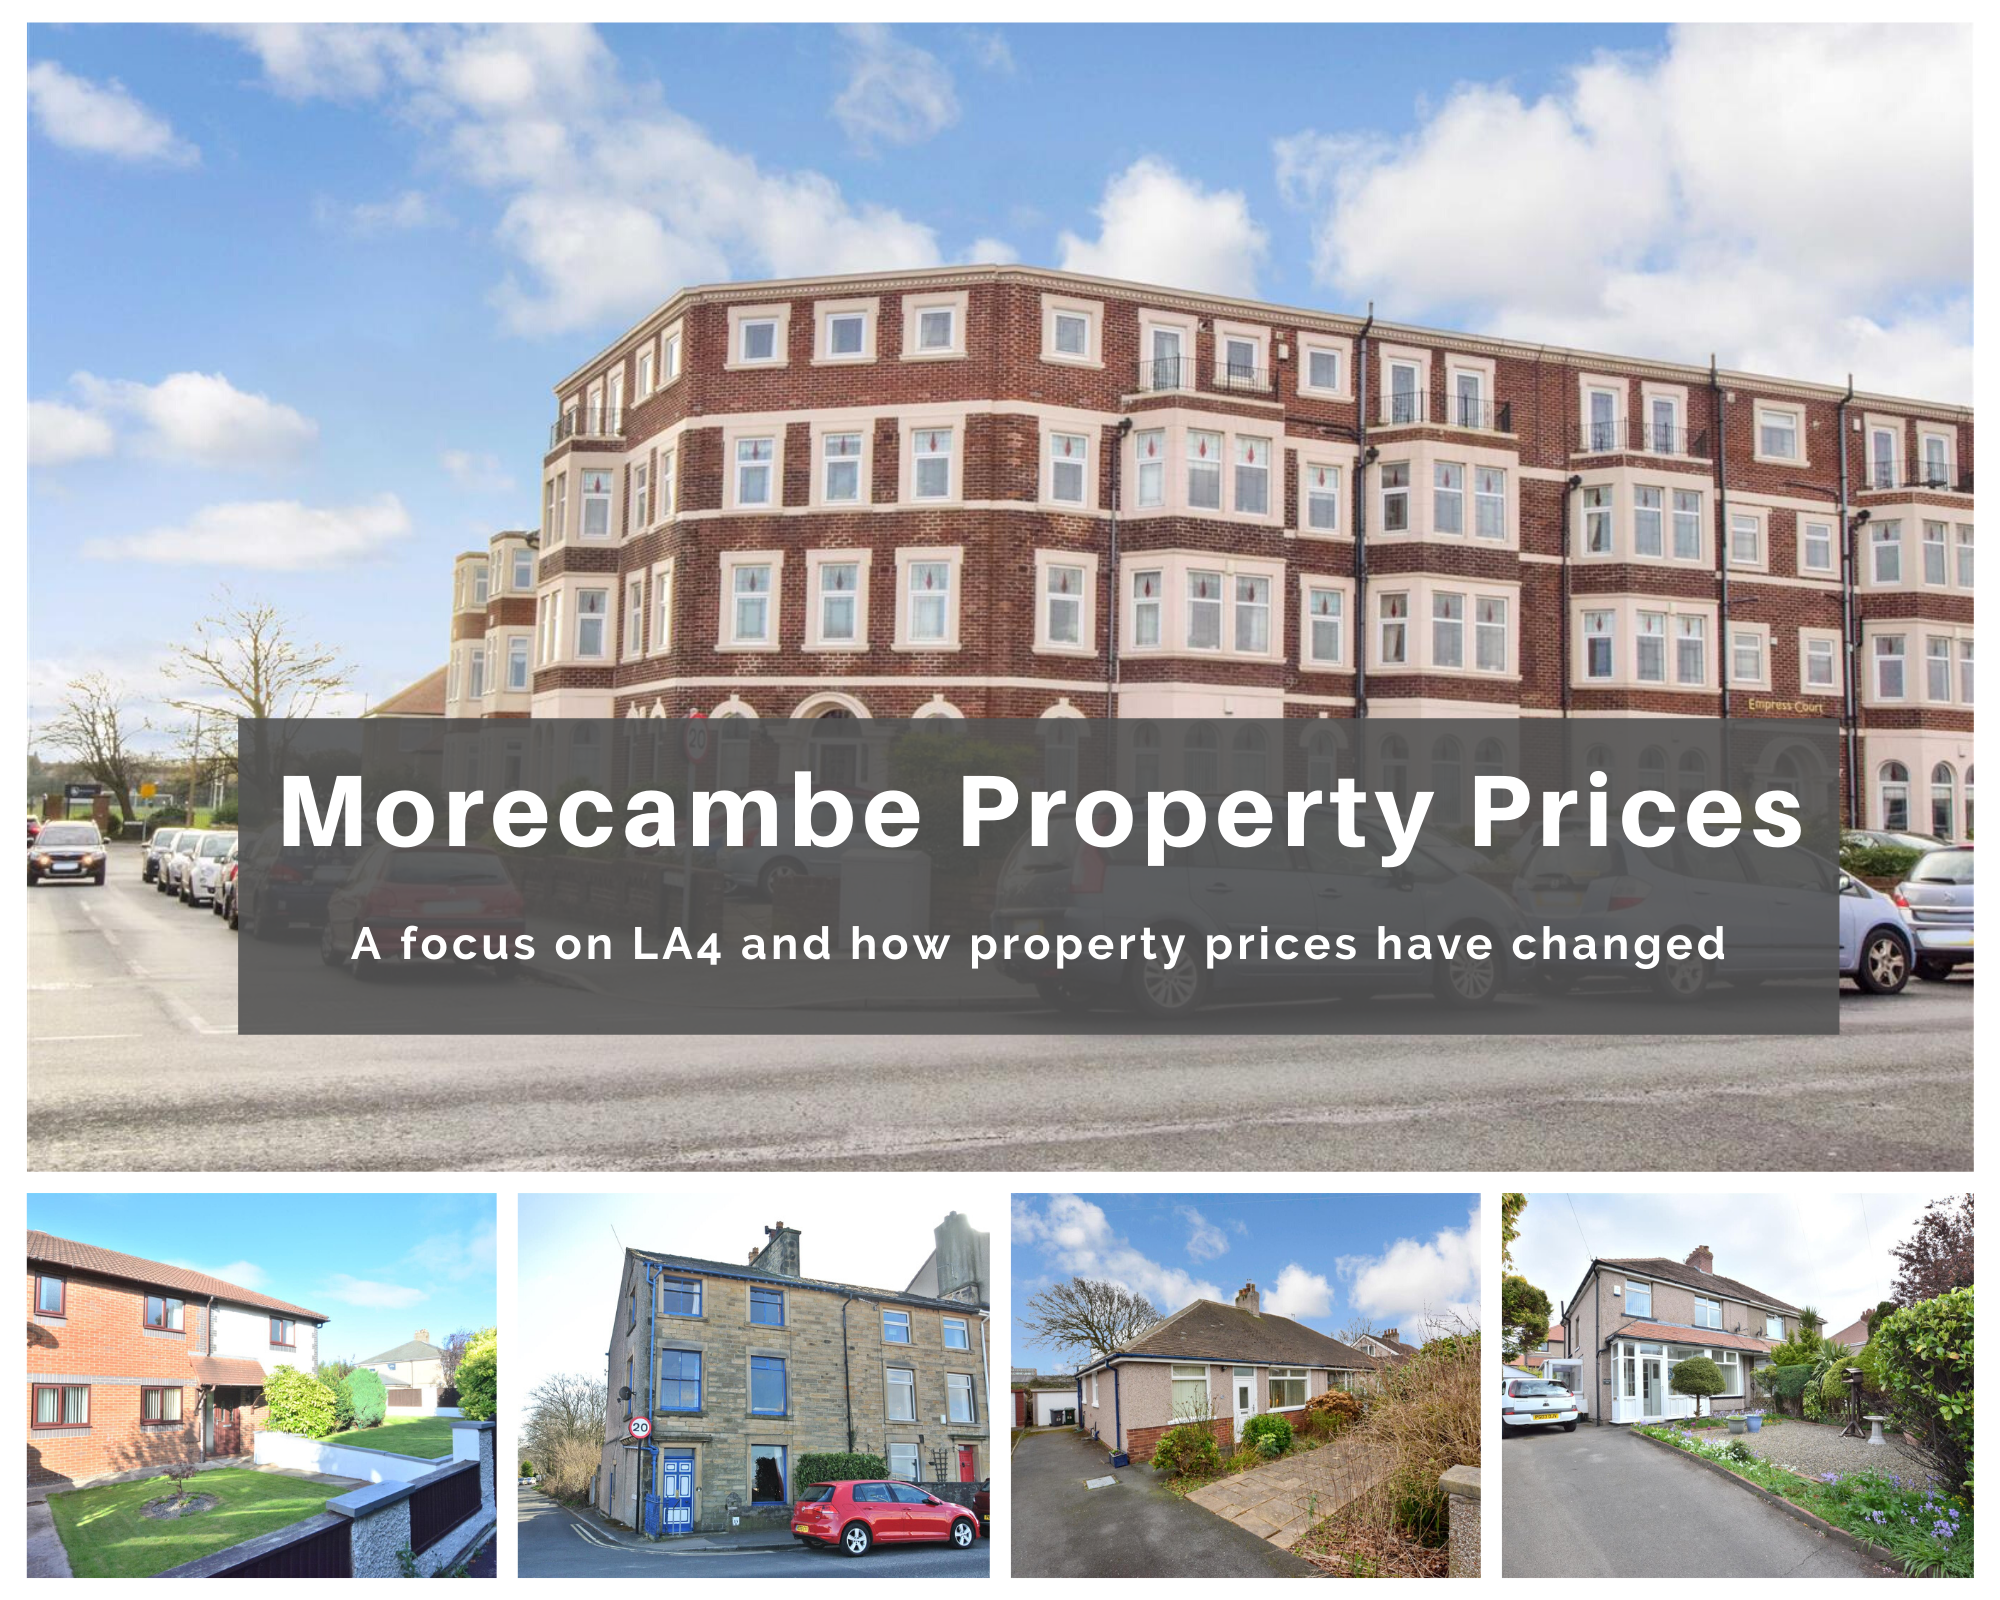 How have property prices changed in the Morecambe Property Market?